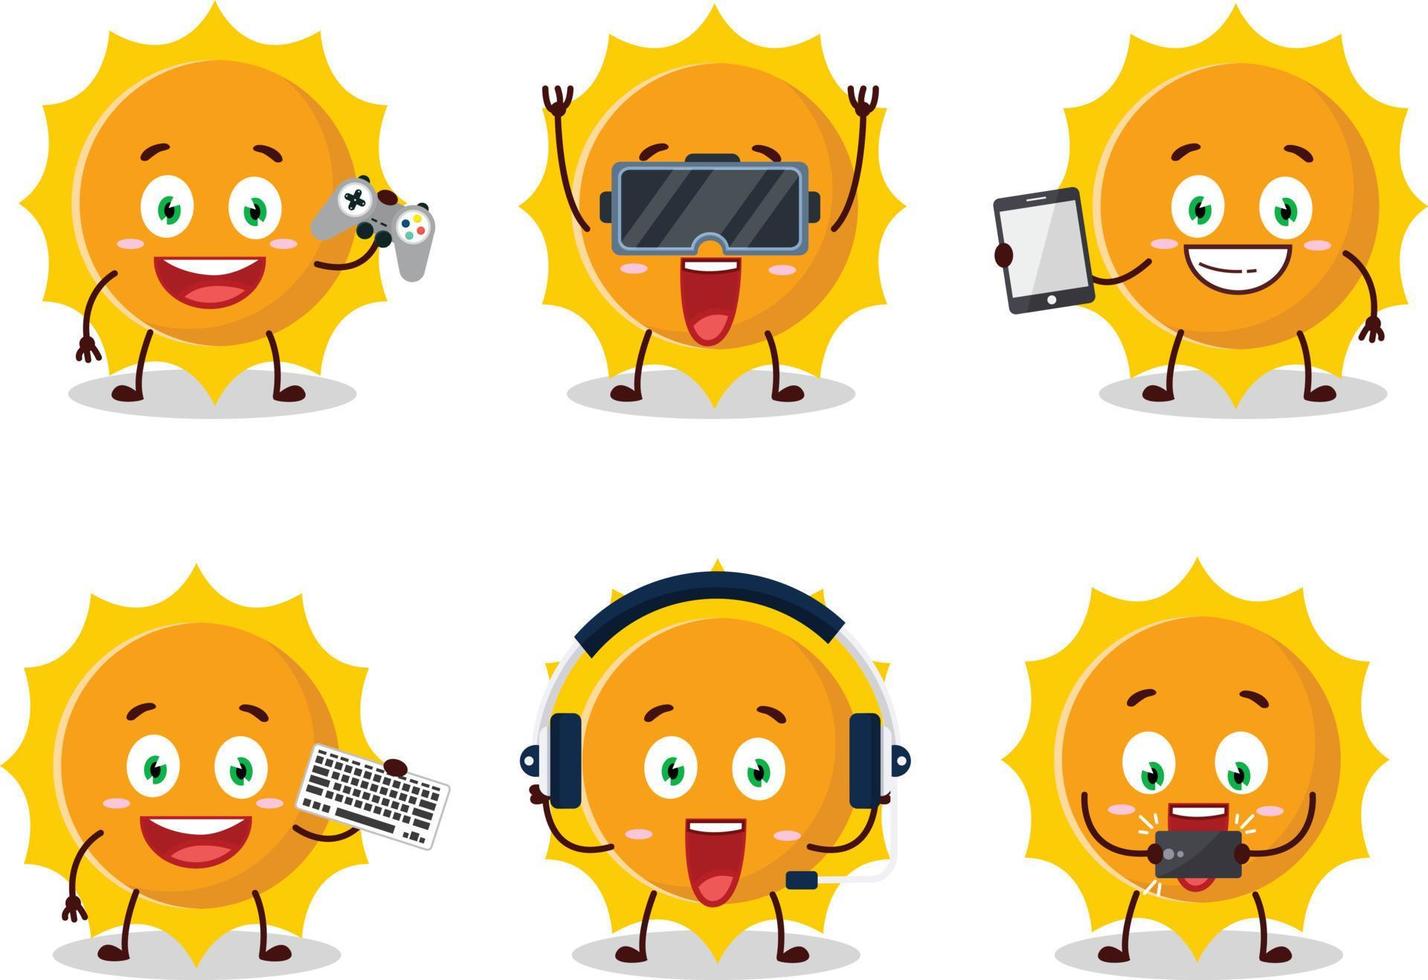 Sun cartoon character are playing games with various cute emoticons vector